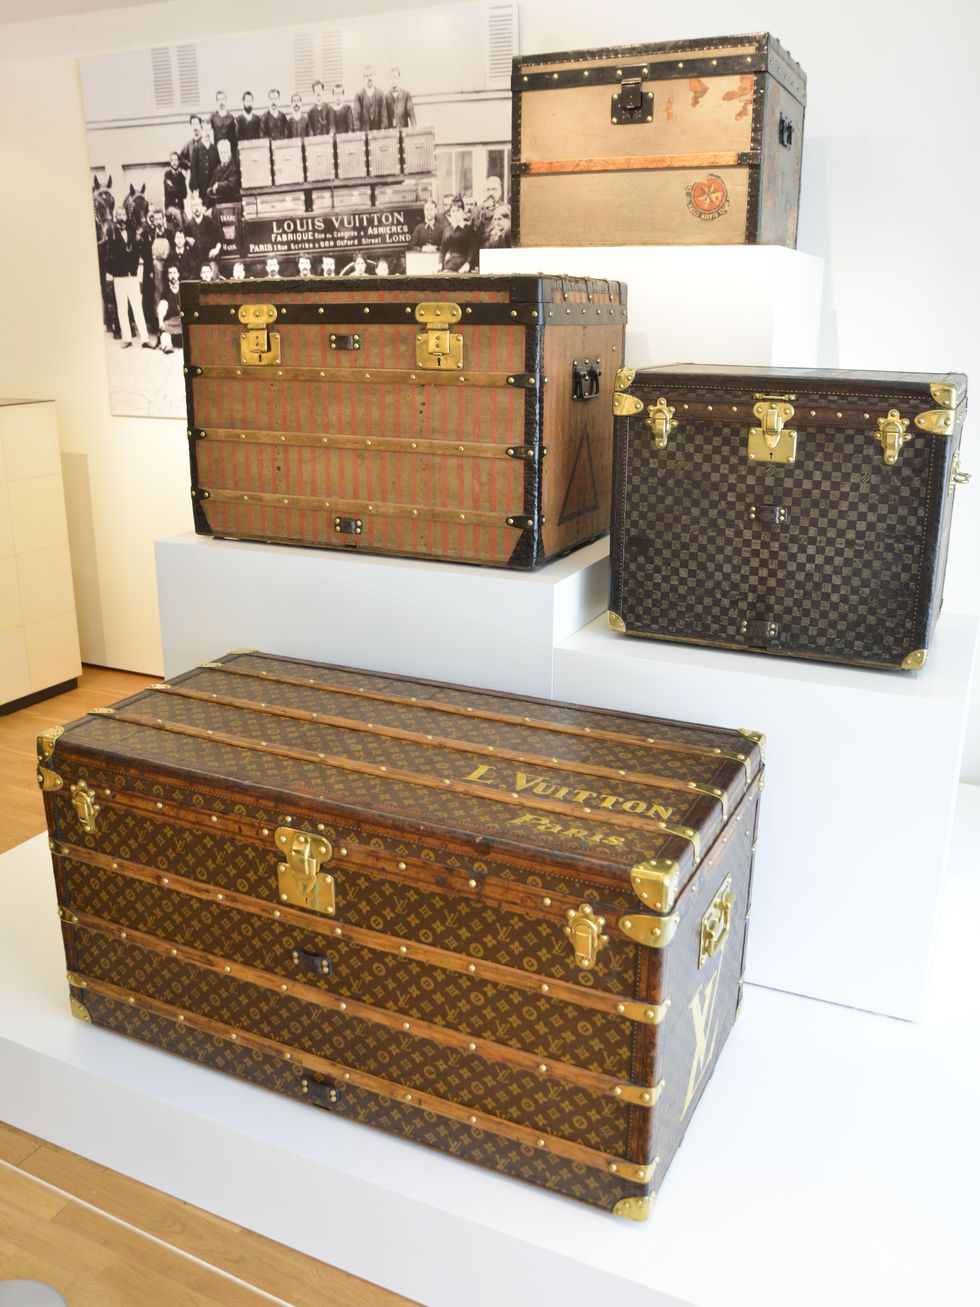 The Louis Vuitton Cigar Case 150: A gift for Him on Valentine's Day